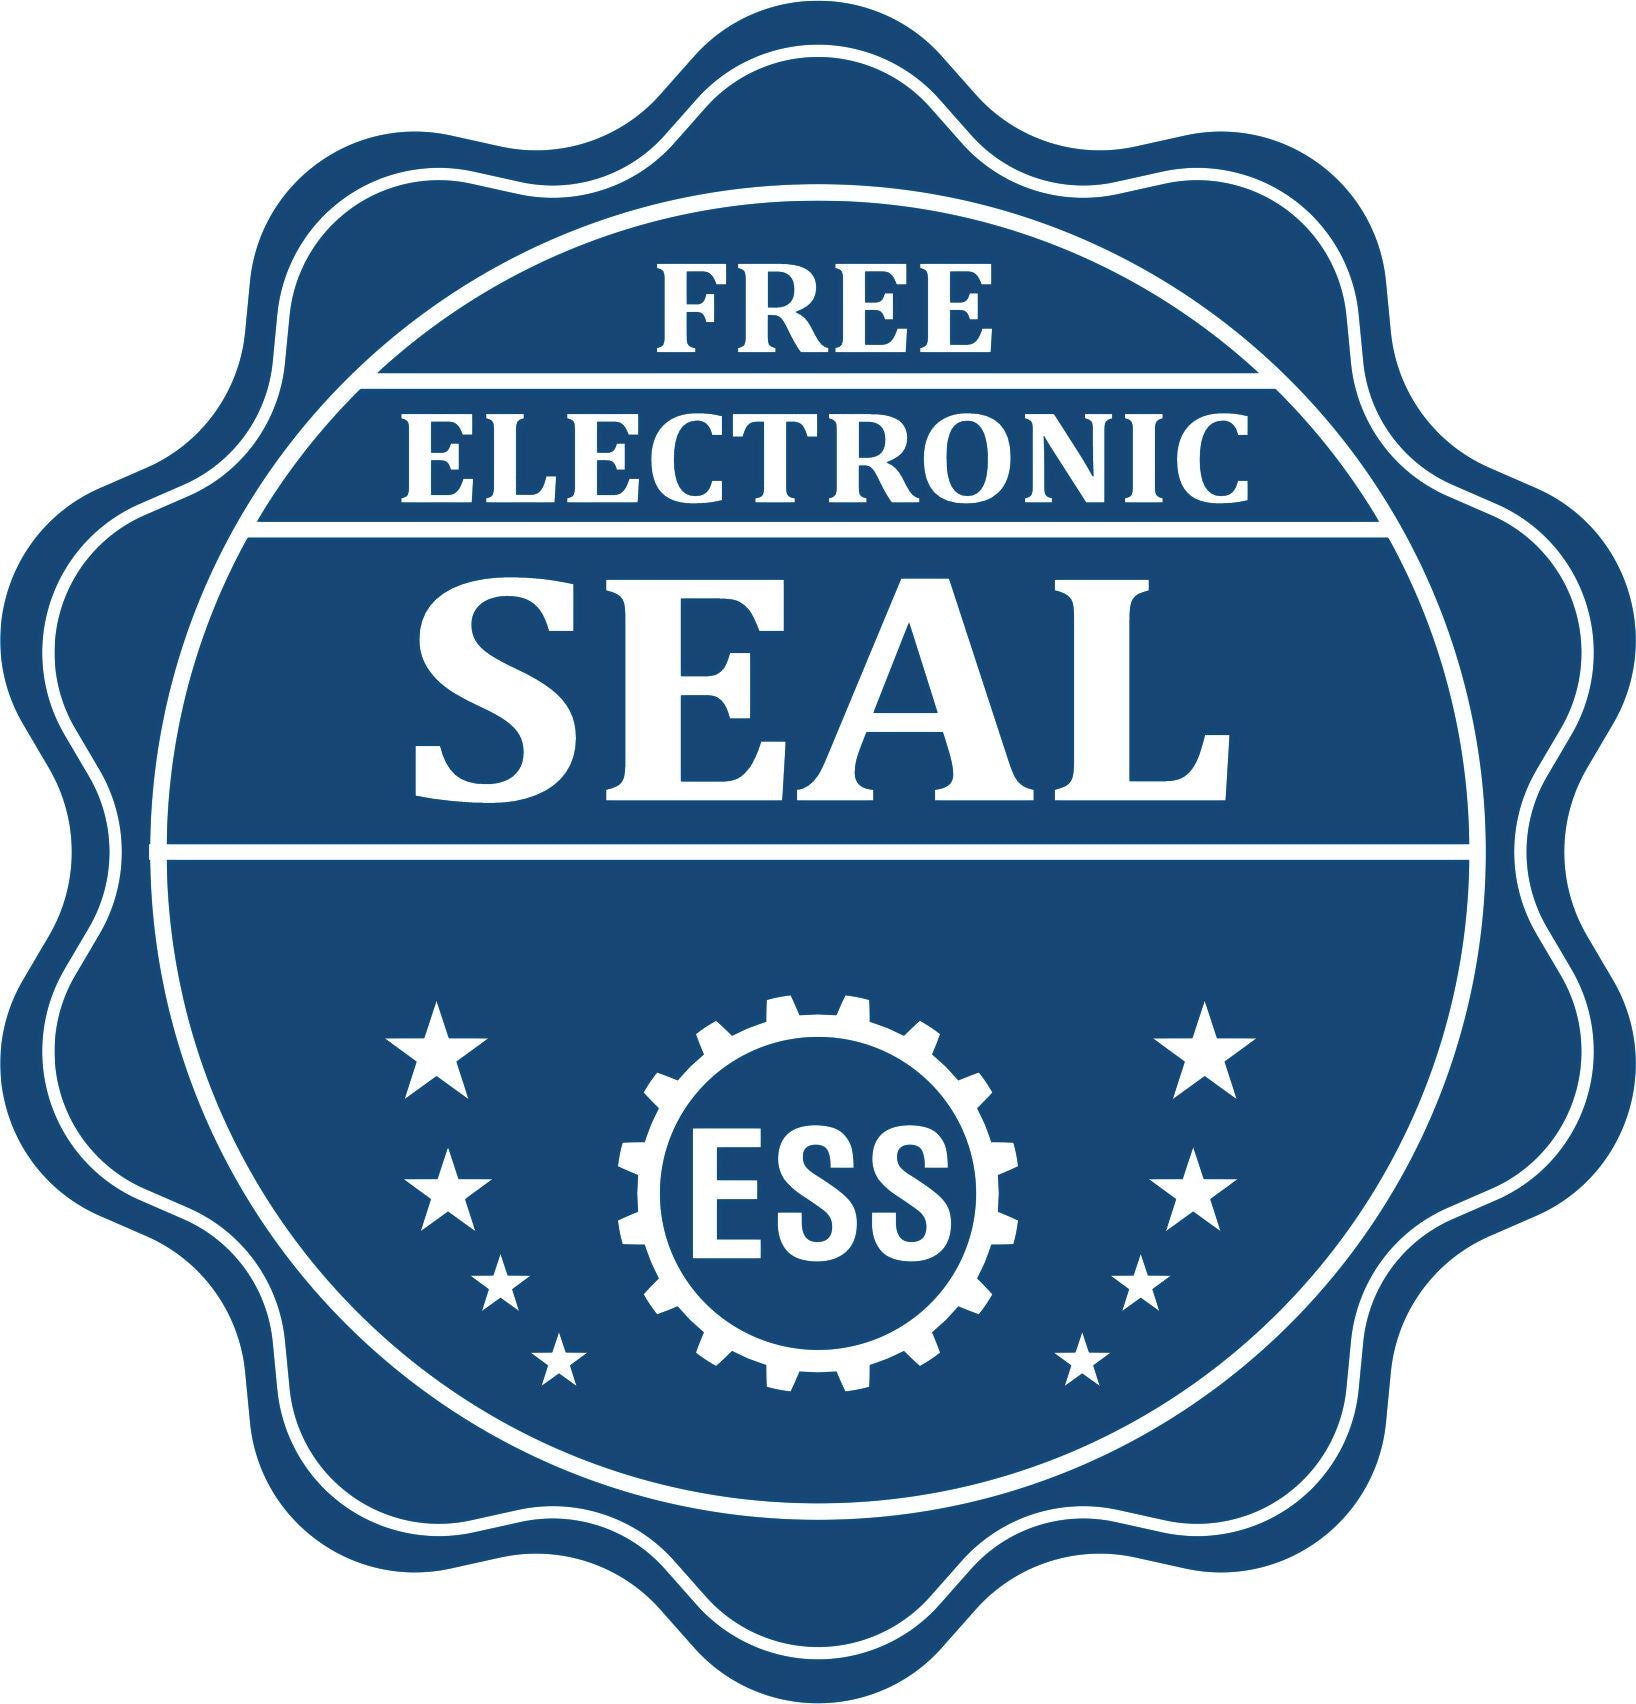 A badge showing a free electronic seal for the Premium MaxLight Pre-Inked Mississippi Landscape Architectural Stamp with stars and the ESS gear on the emblem.